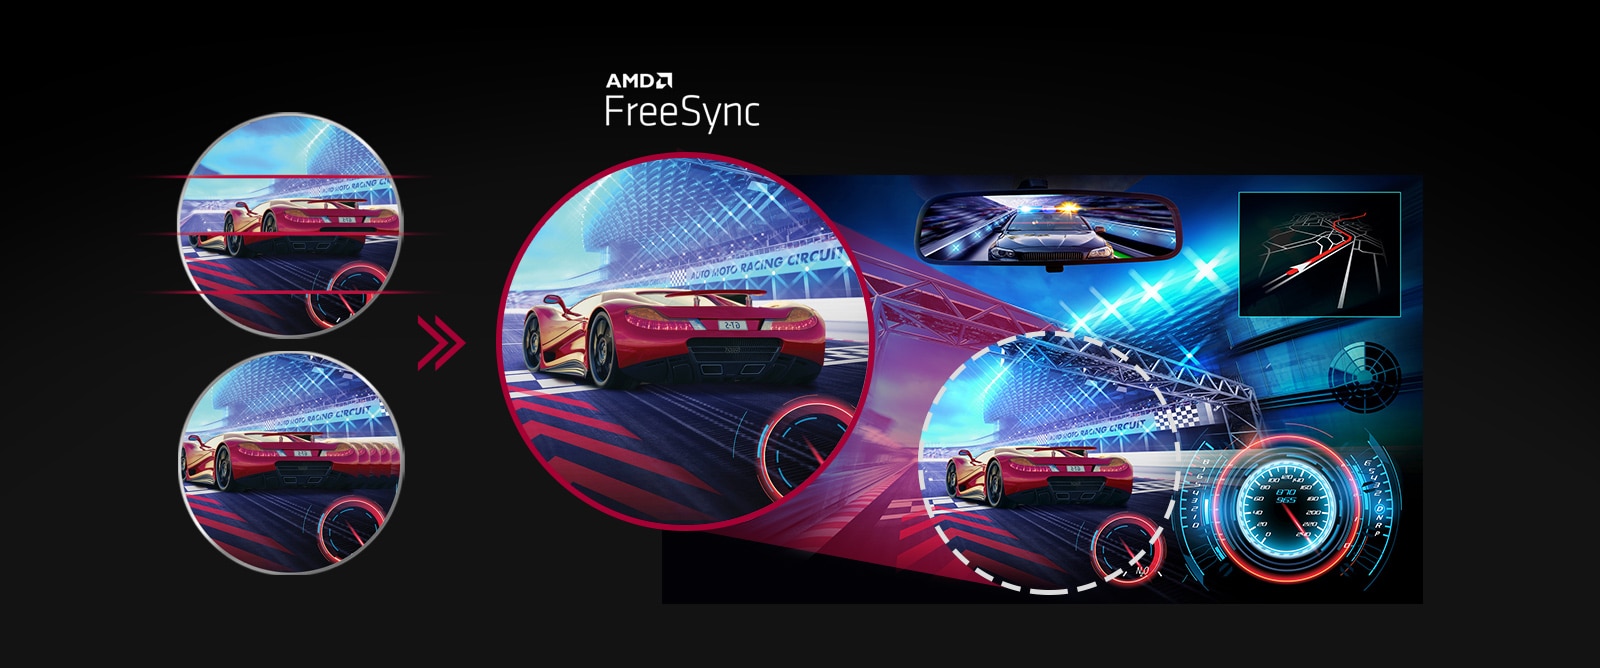 AMD FreeSync™: Clearer, Smoother Image